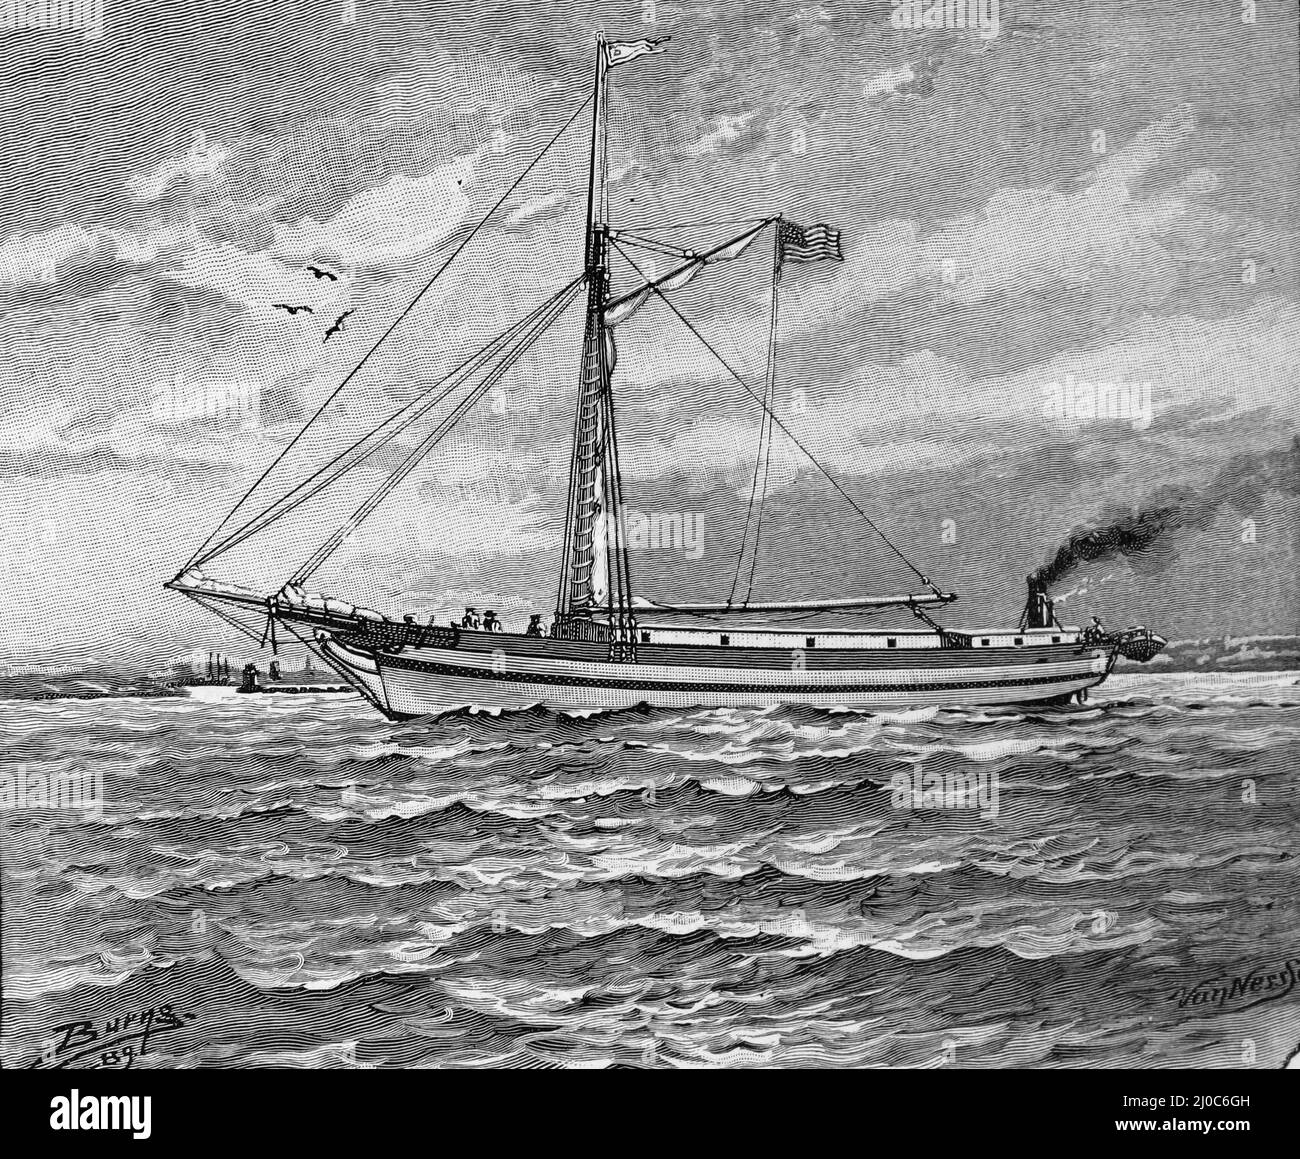 The Vandalia Steam Powered Propeller Driven Ship on the Great Lakes of North America; circa 1889; Designed  by John Ericsson Black and White Illustration; Stock Photo